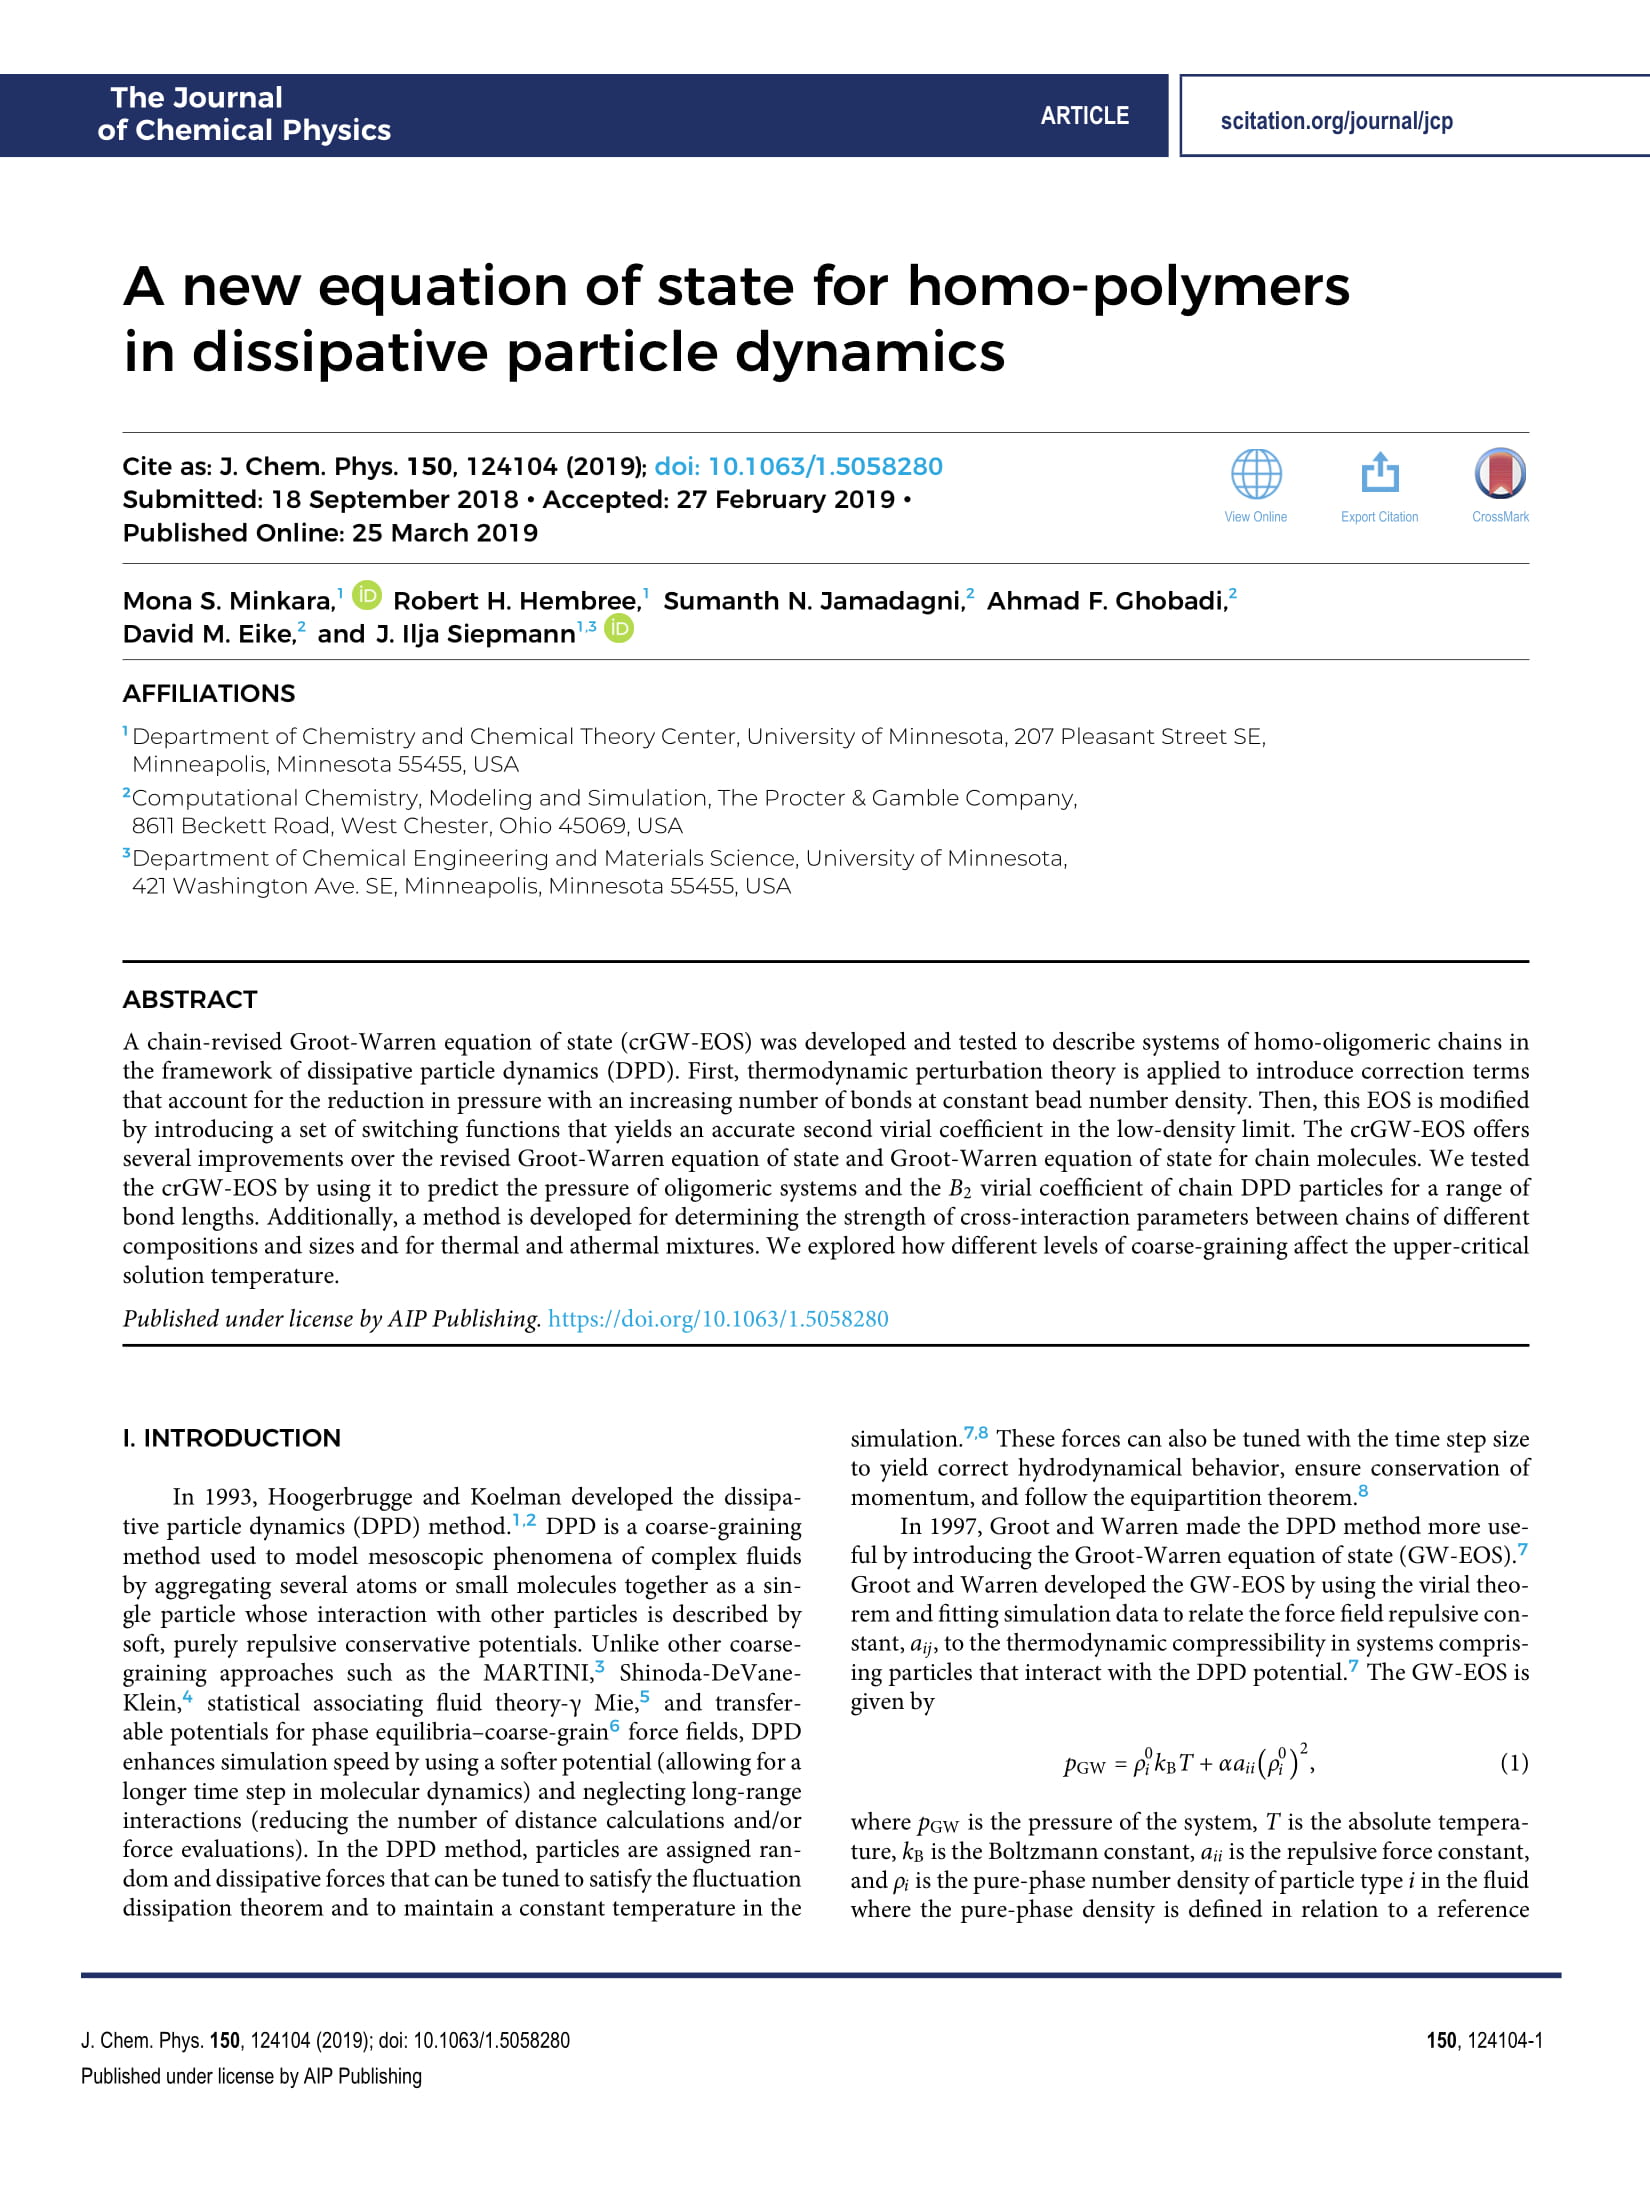 A New Equation of State for Homo-Polymers in Dissipative Particle Dynamics